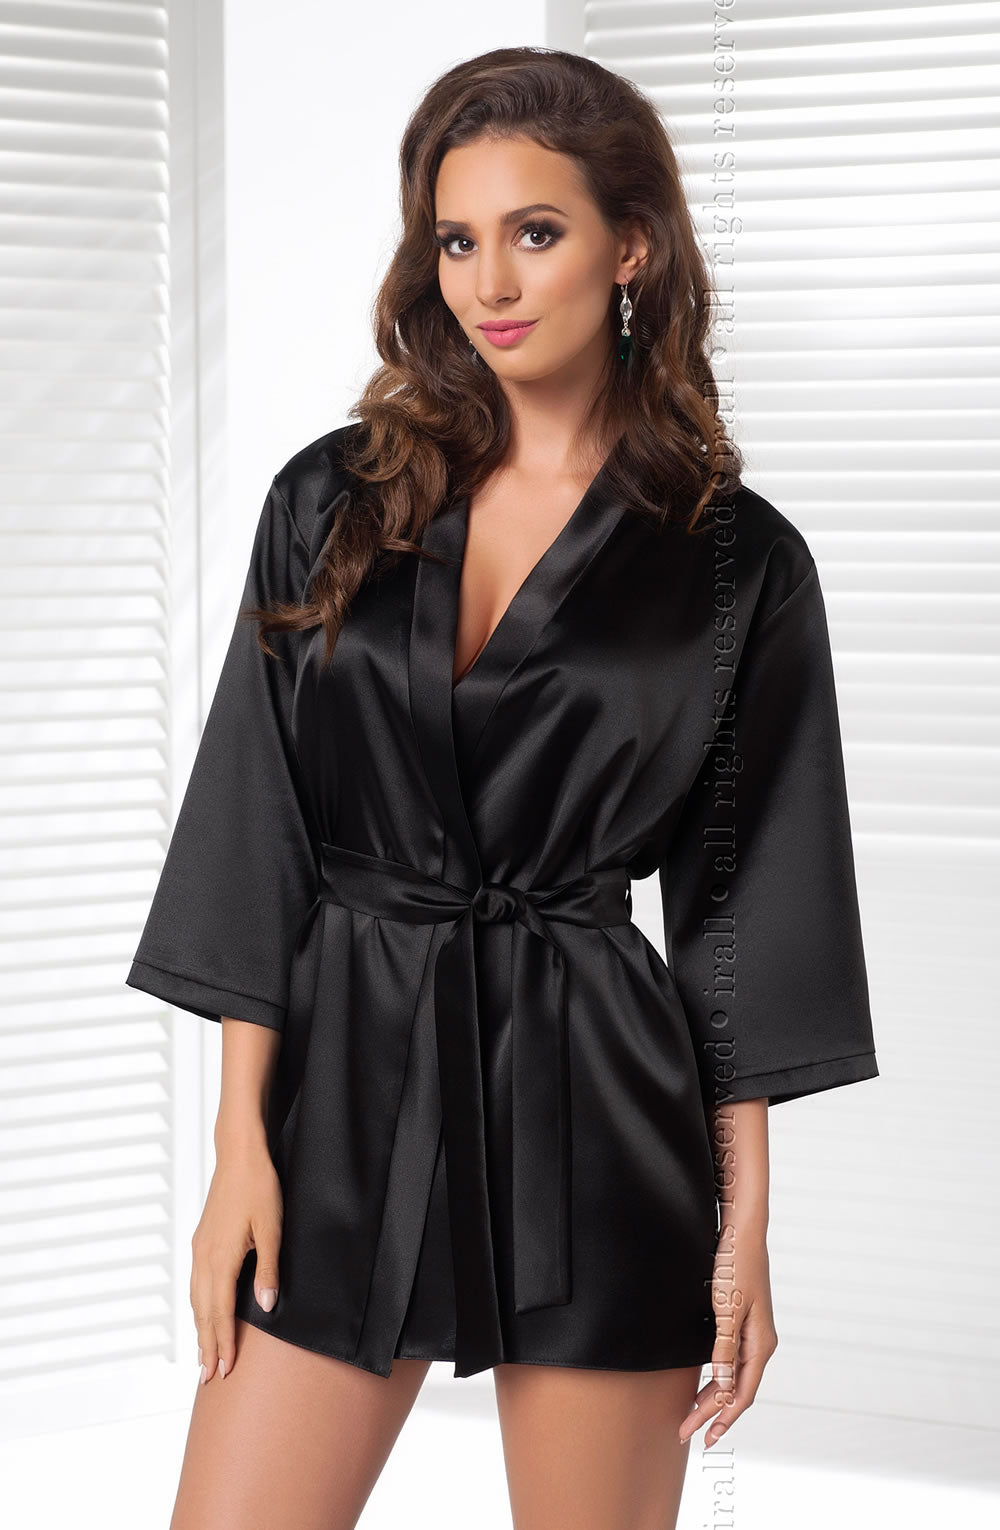 Irall Aria Dressing Gown  Irall, NEWLY-IMPORTED, Nightwear, Plus Sizes, Robes - So Luxe Lingerie